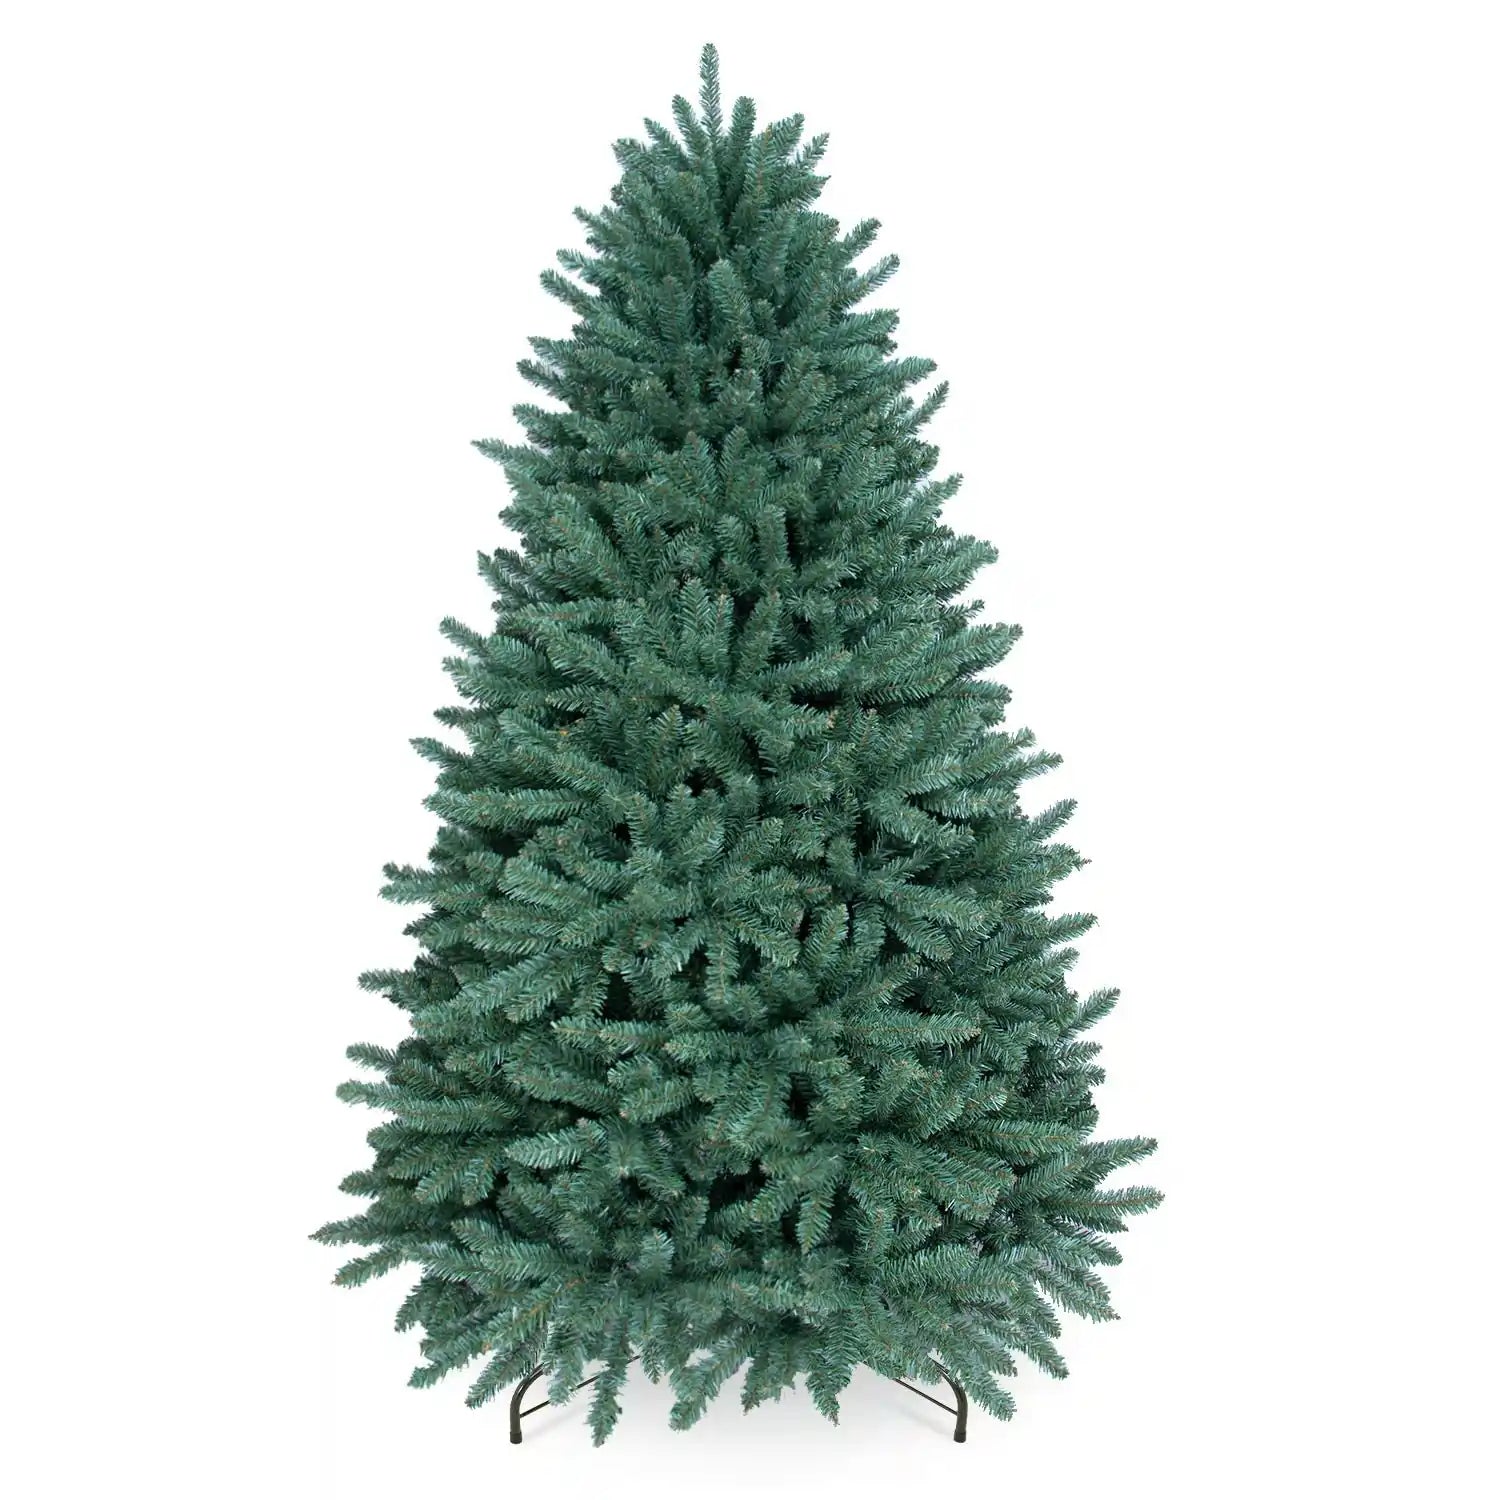 Xmas tree can be uesed indoor or outdoor#size_10FT